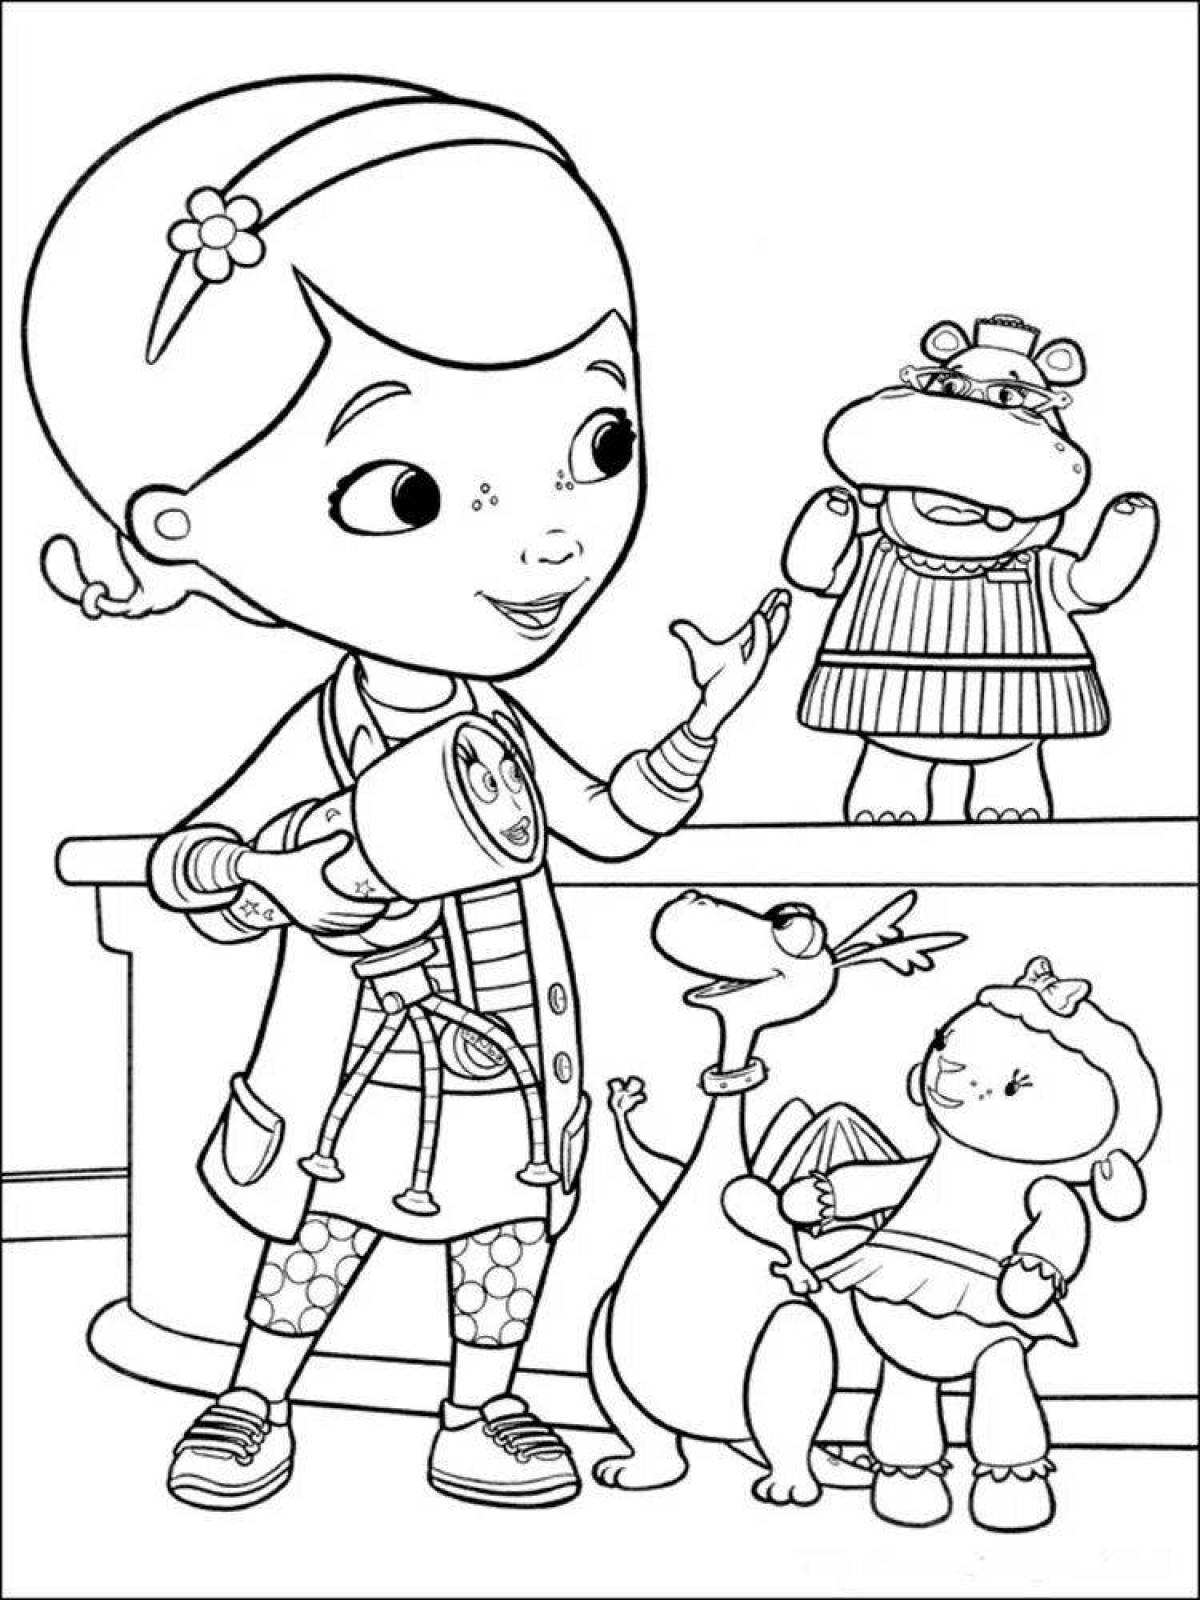 Doctor animated coloring page